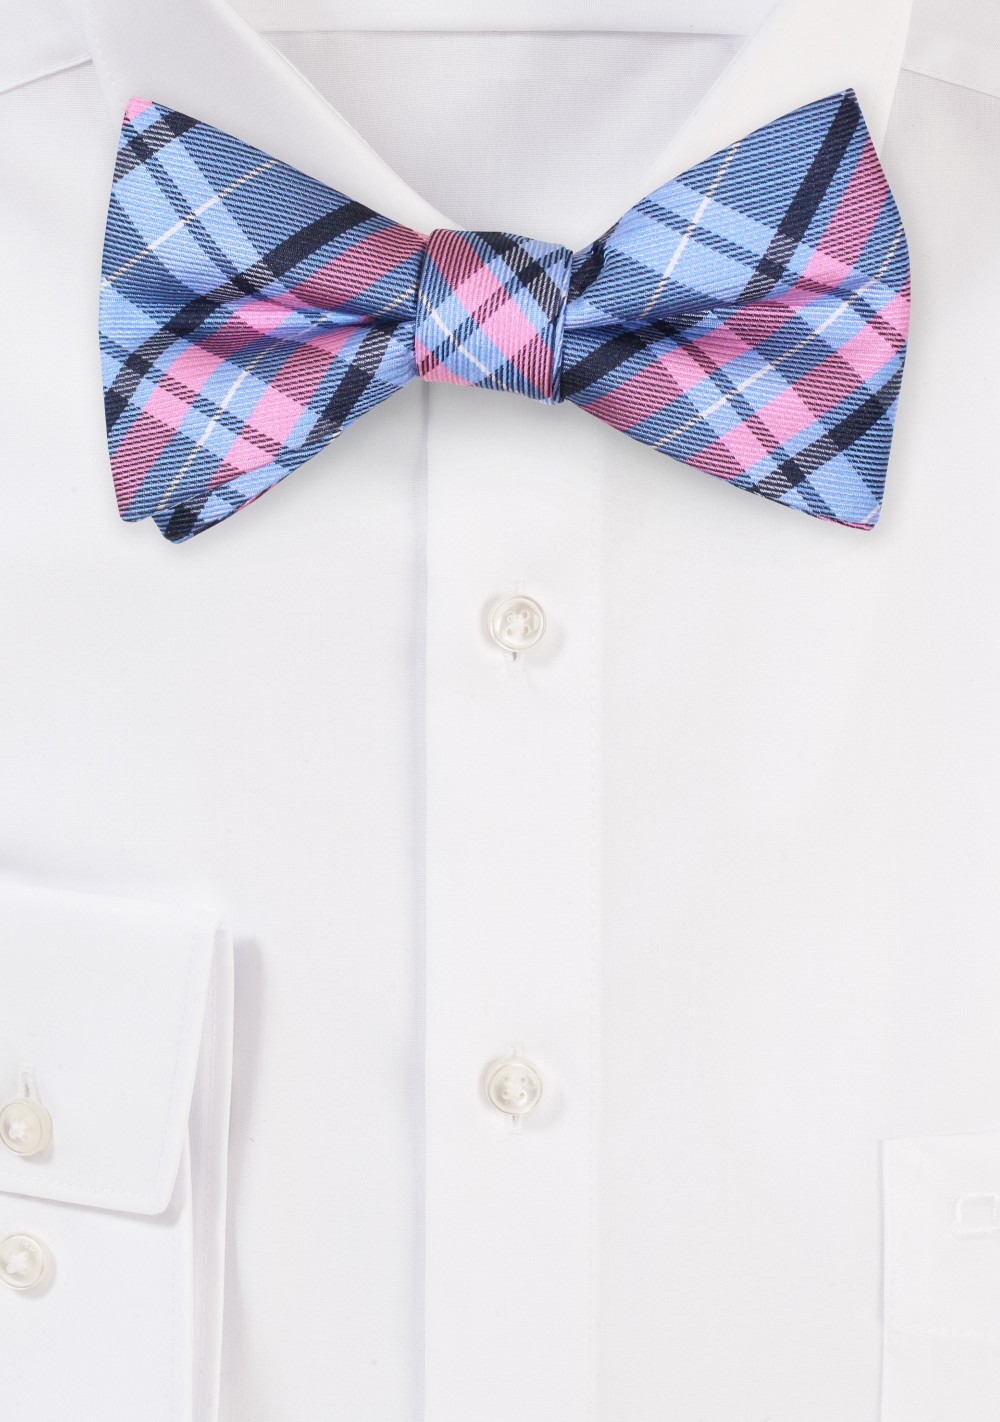 Tartan Check Bow Tie in Blue and Pink